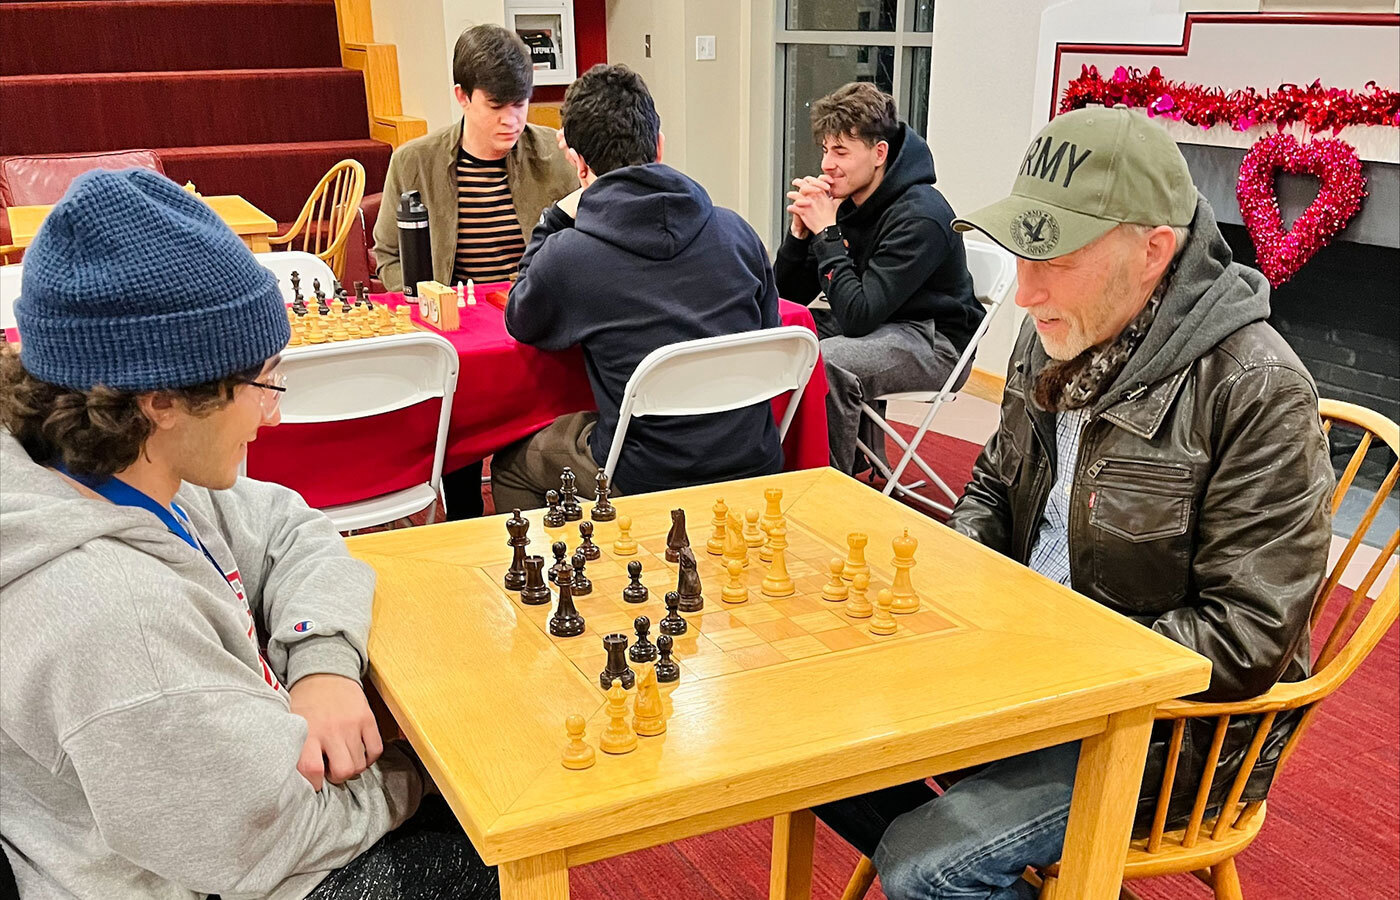 Chess with Vets